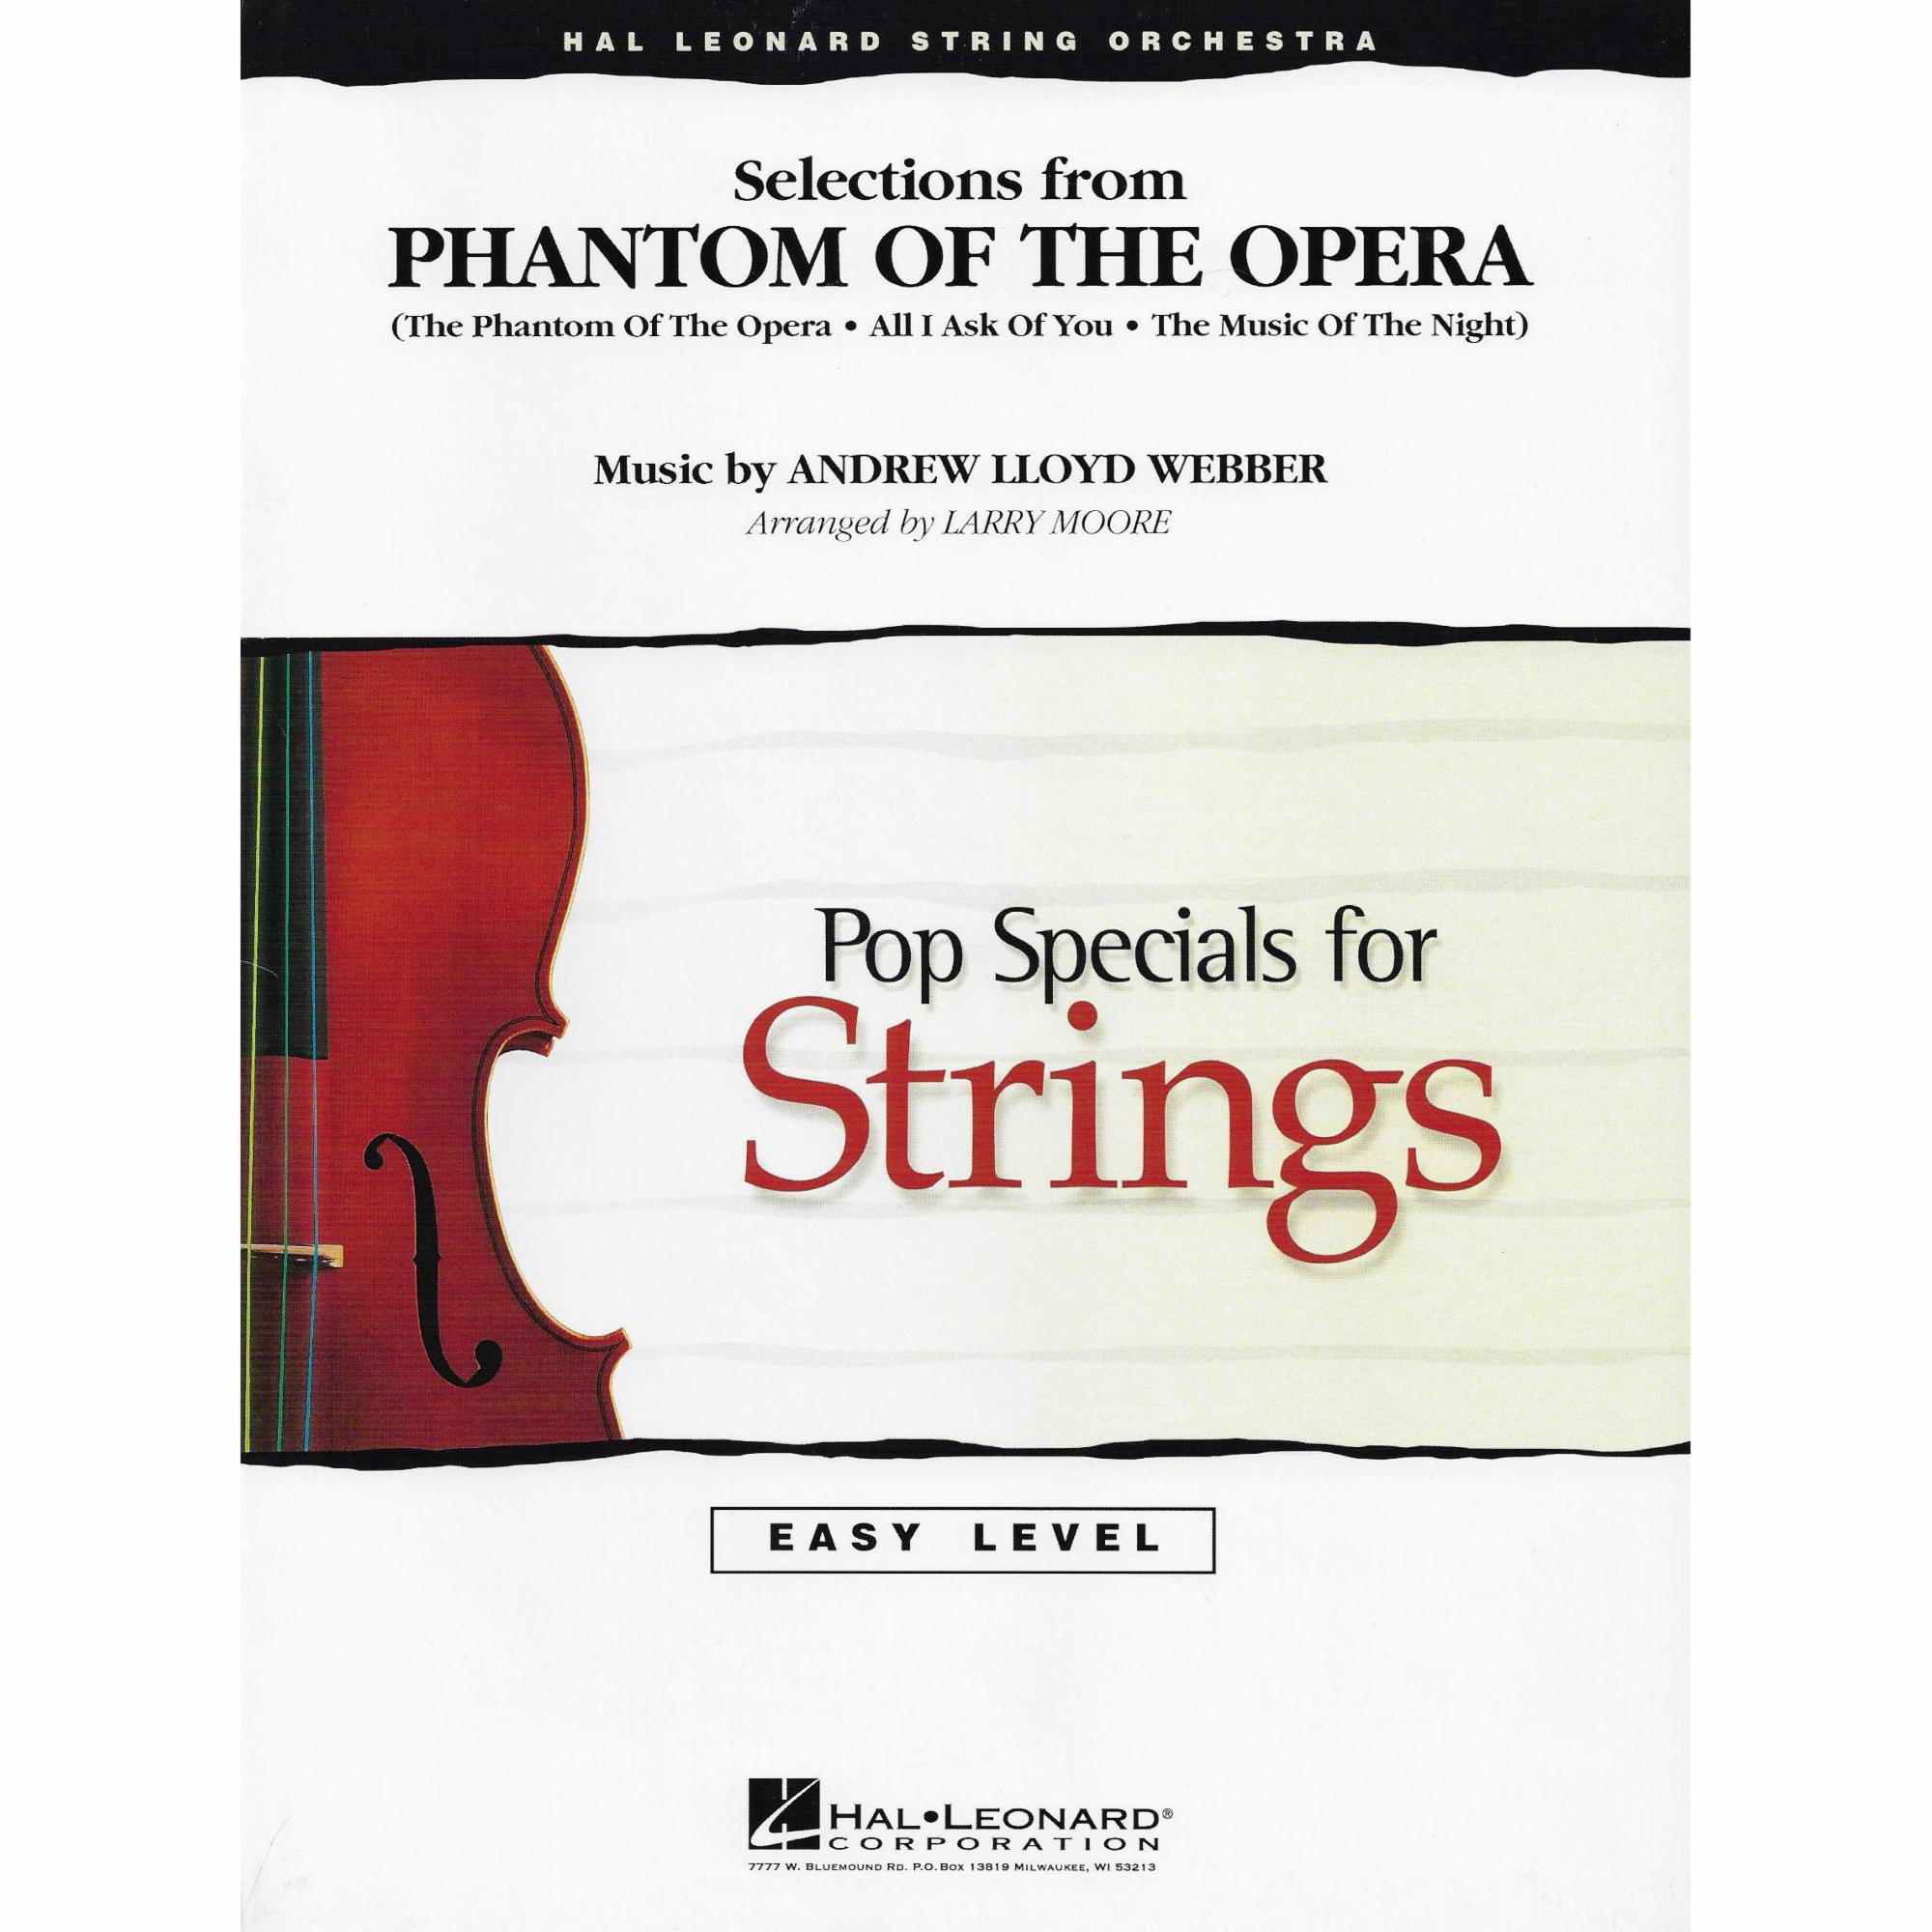 Selections from Phantom of the Opera for String Orchestra